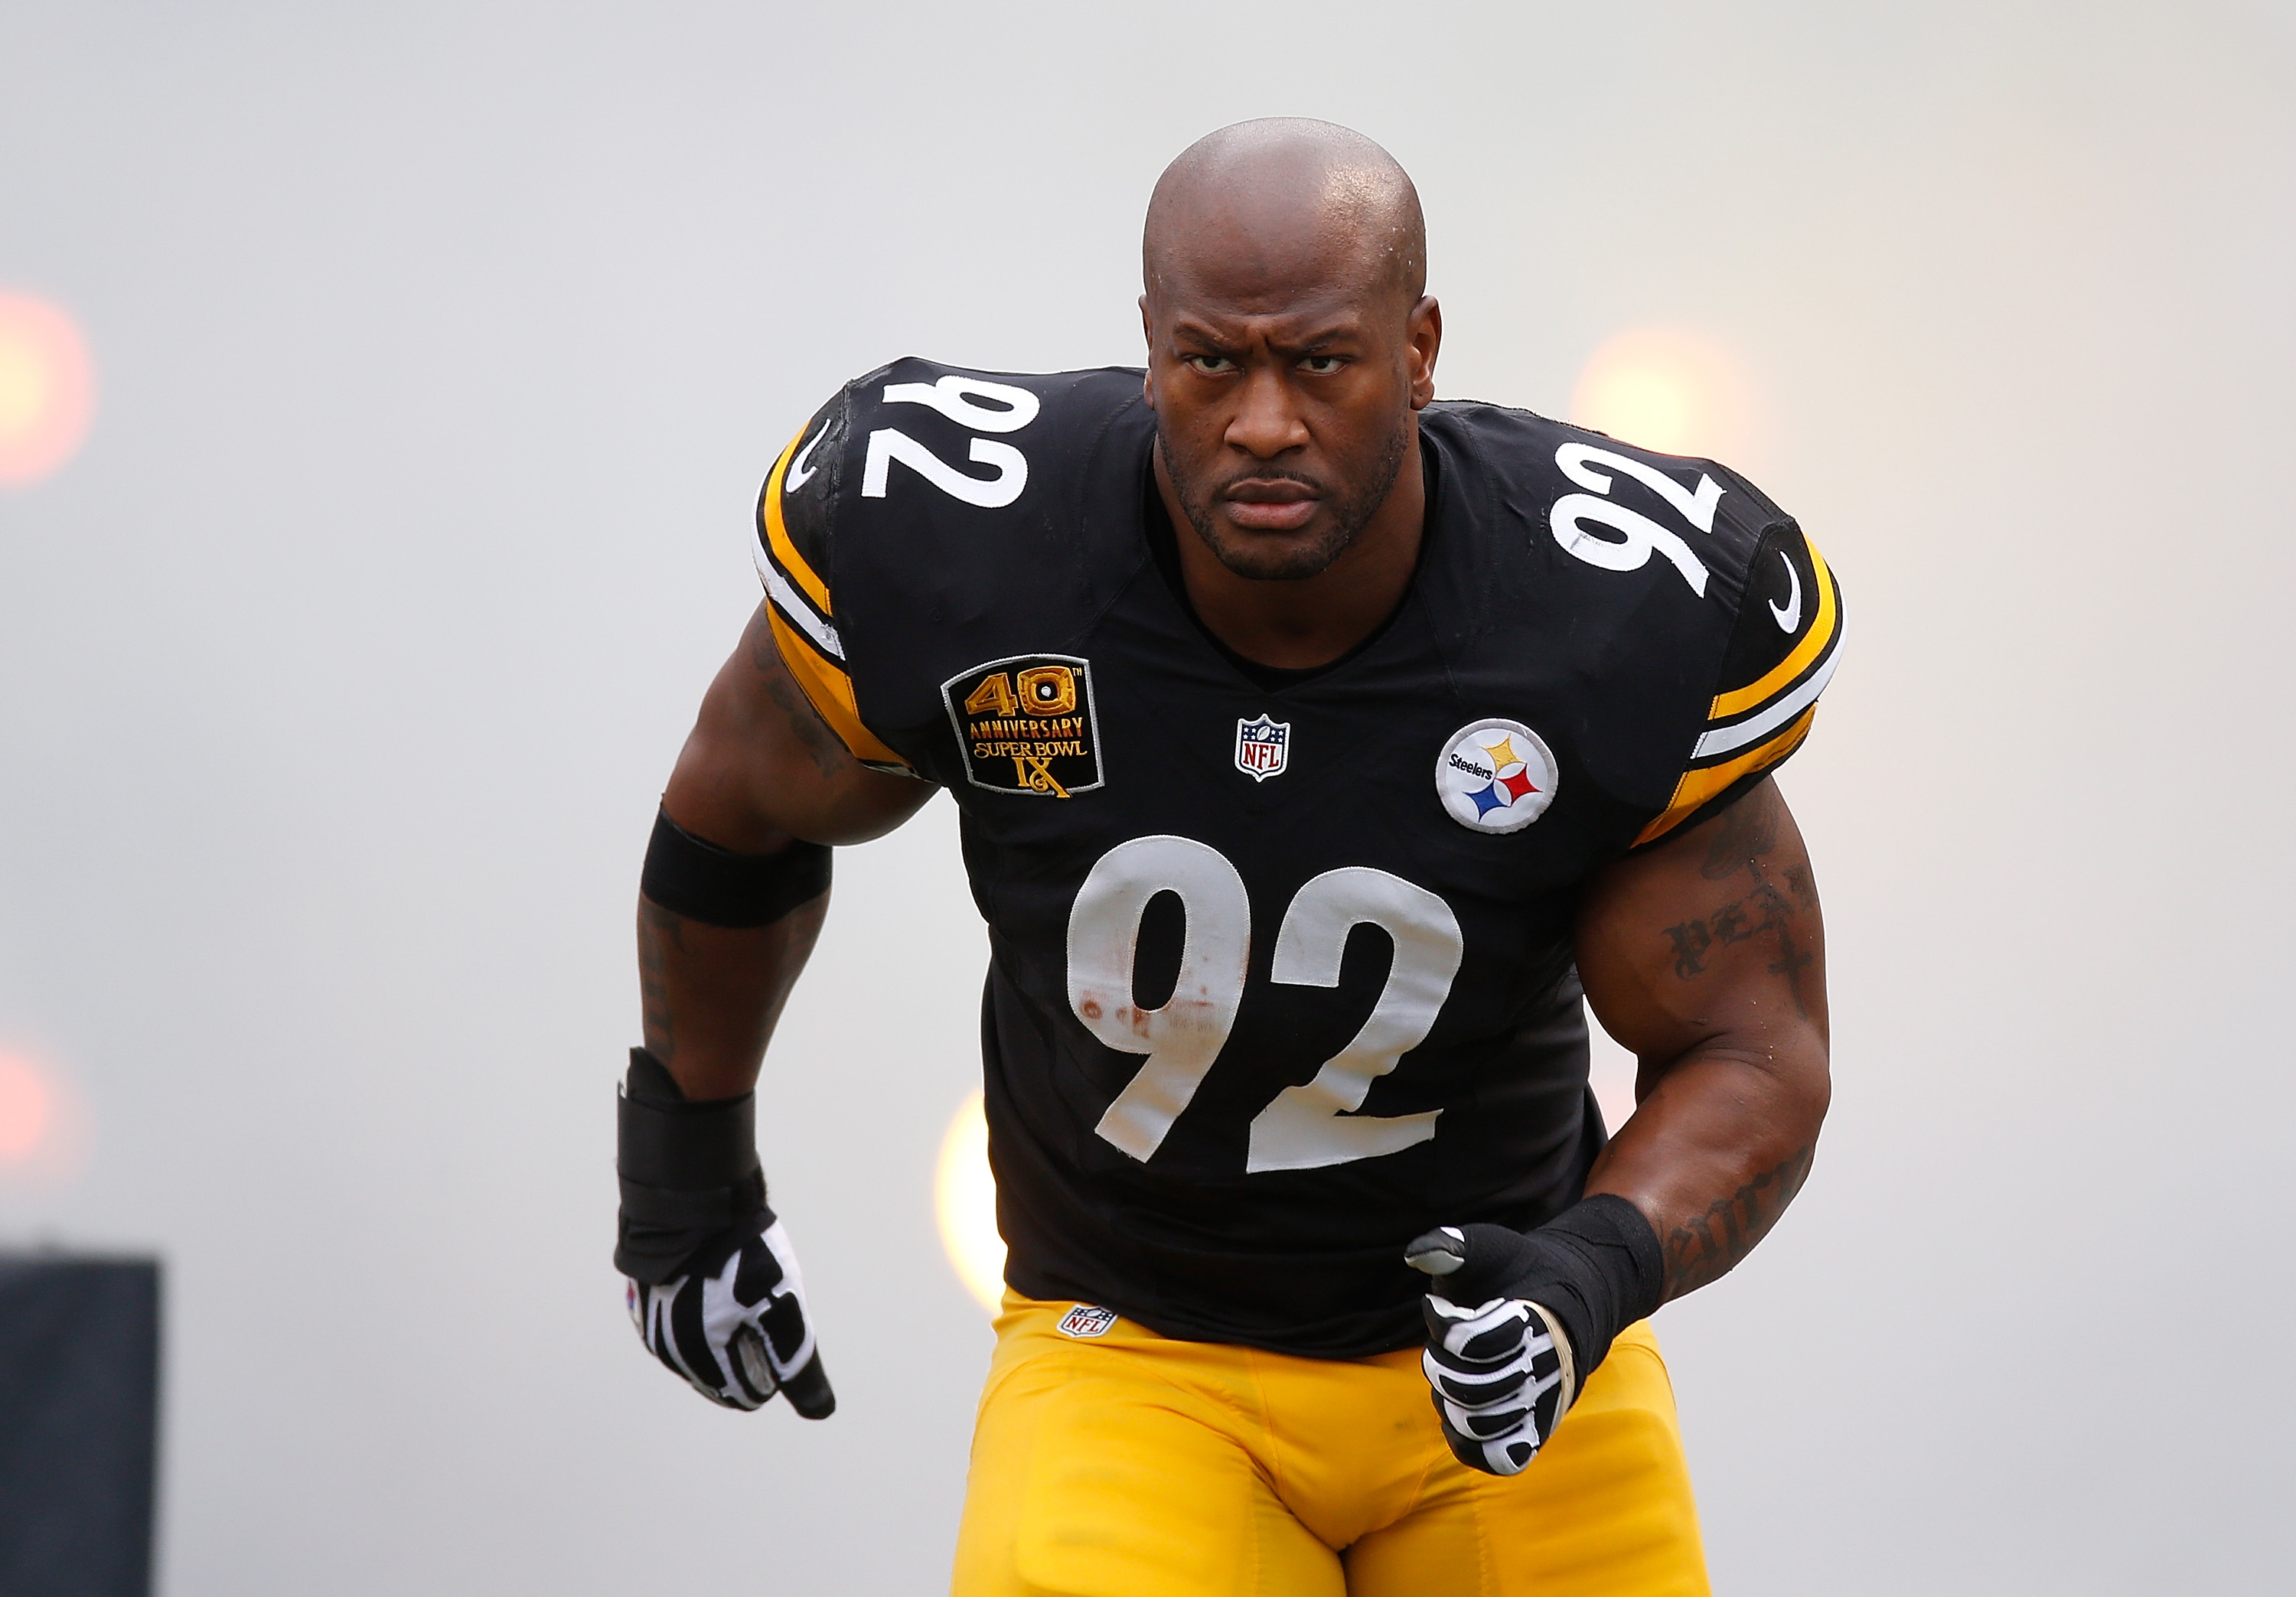 New England Patriots sign former Steelers pass rusher James Harrison